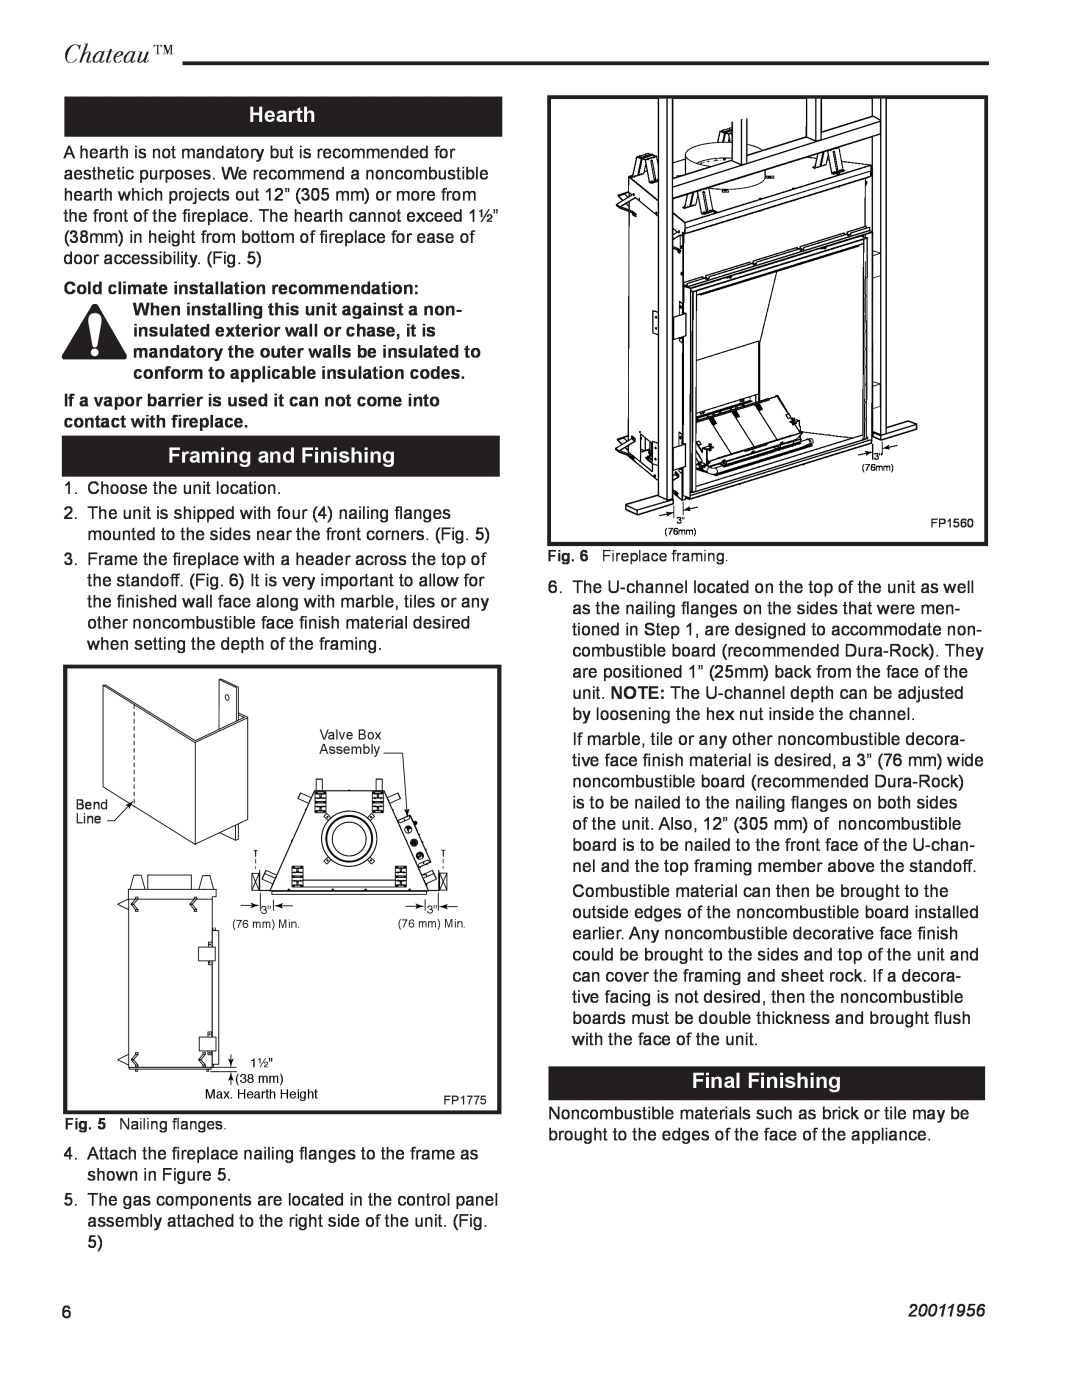 CFM Corporation DVT44IN, DVT38IN installation instructions Hearth, Framing and Finishing, Final Finishing, Chateau, 20011956 